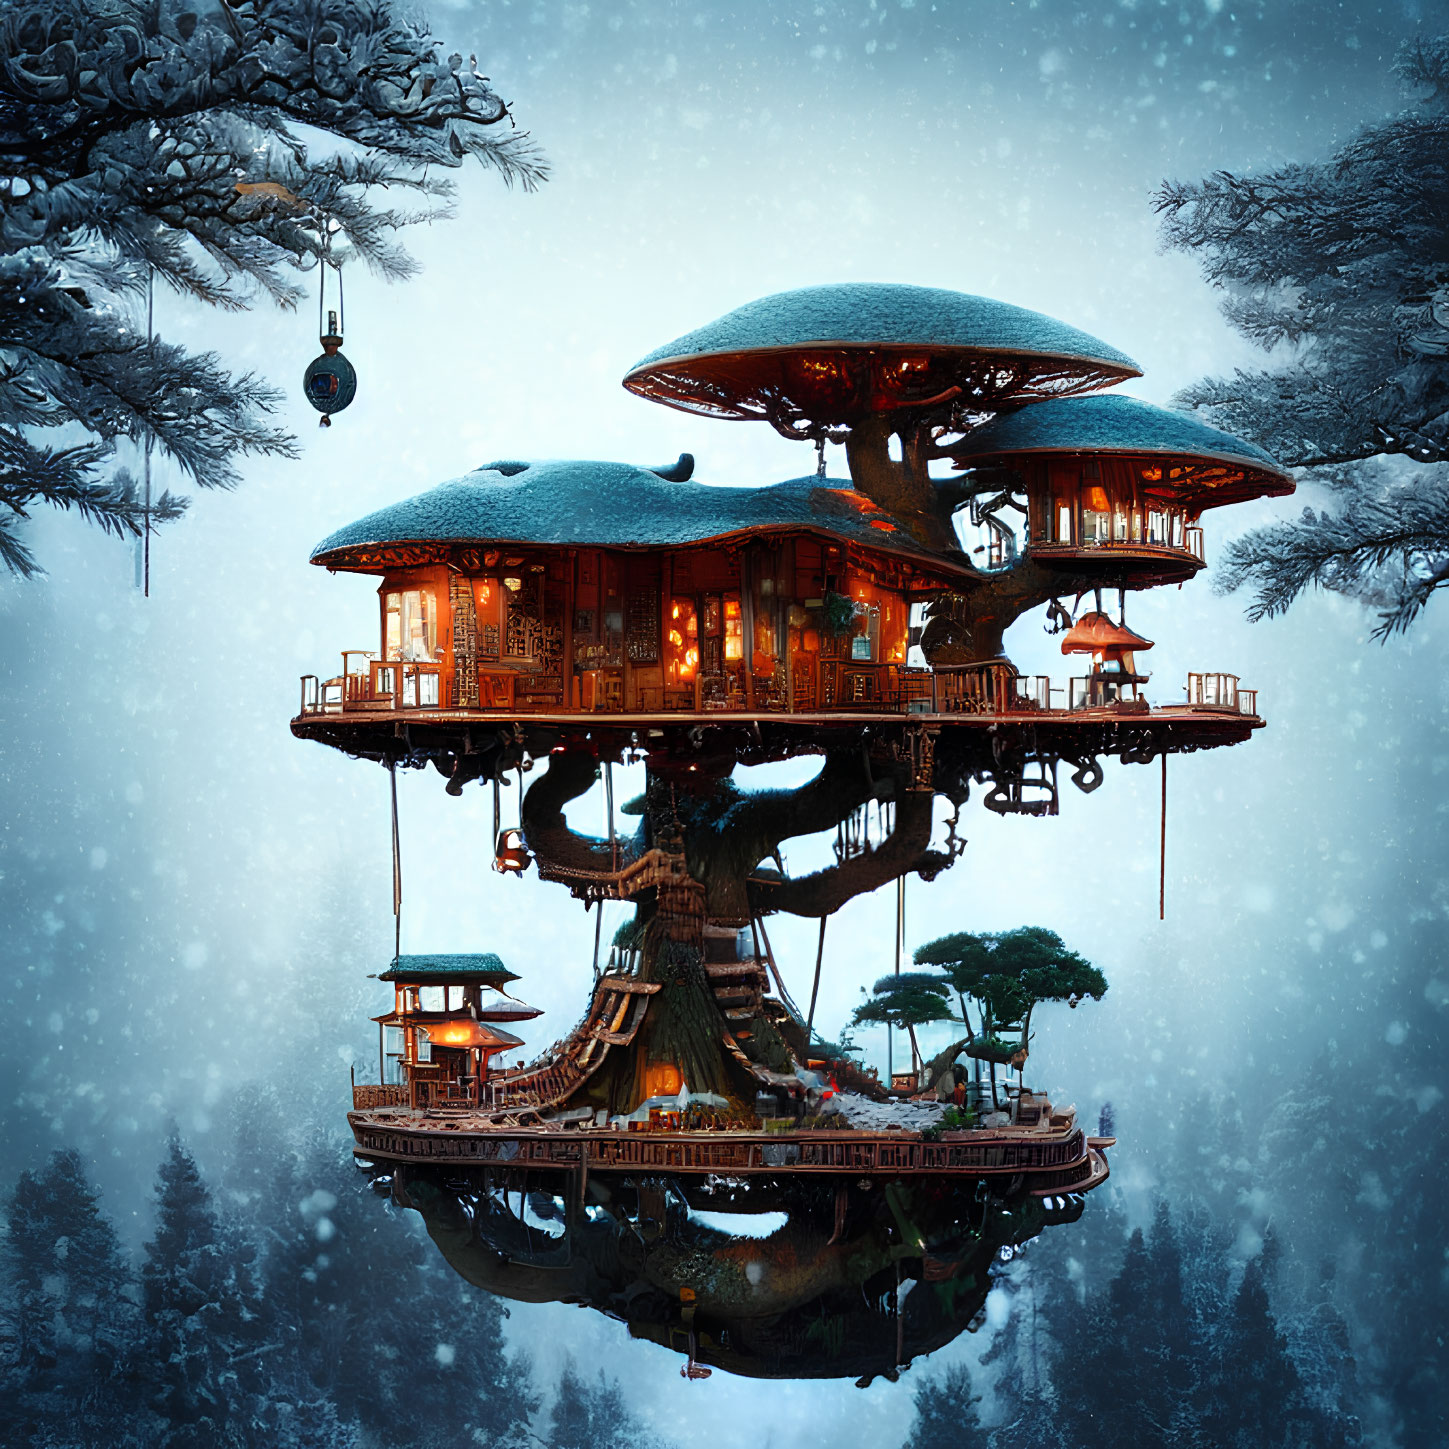 Floating treehouse with multiple levels in snowy landscape & cable car overhead